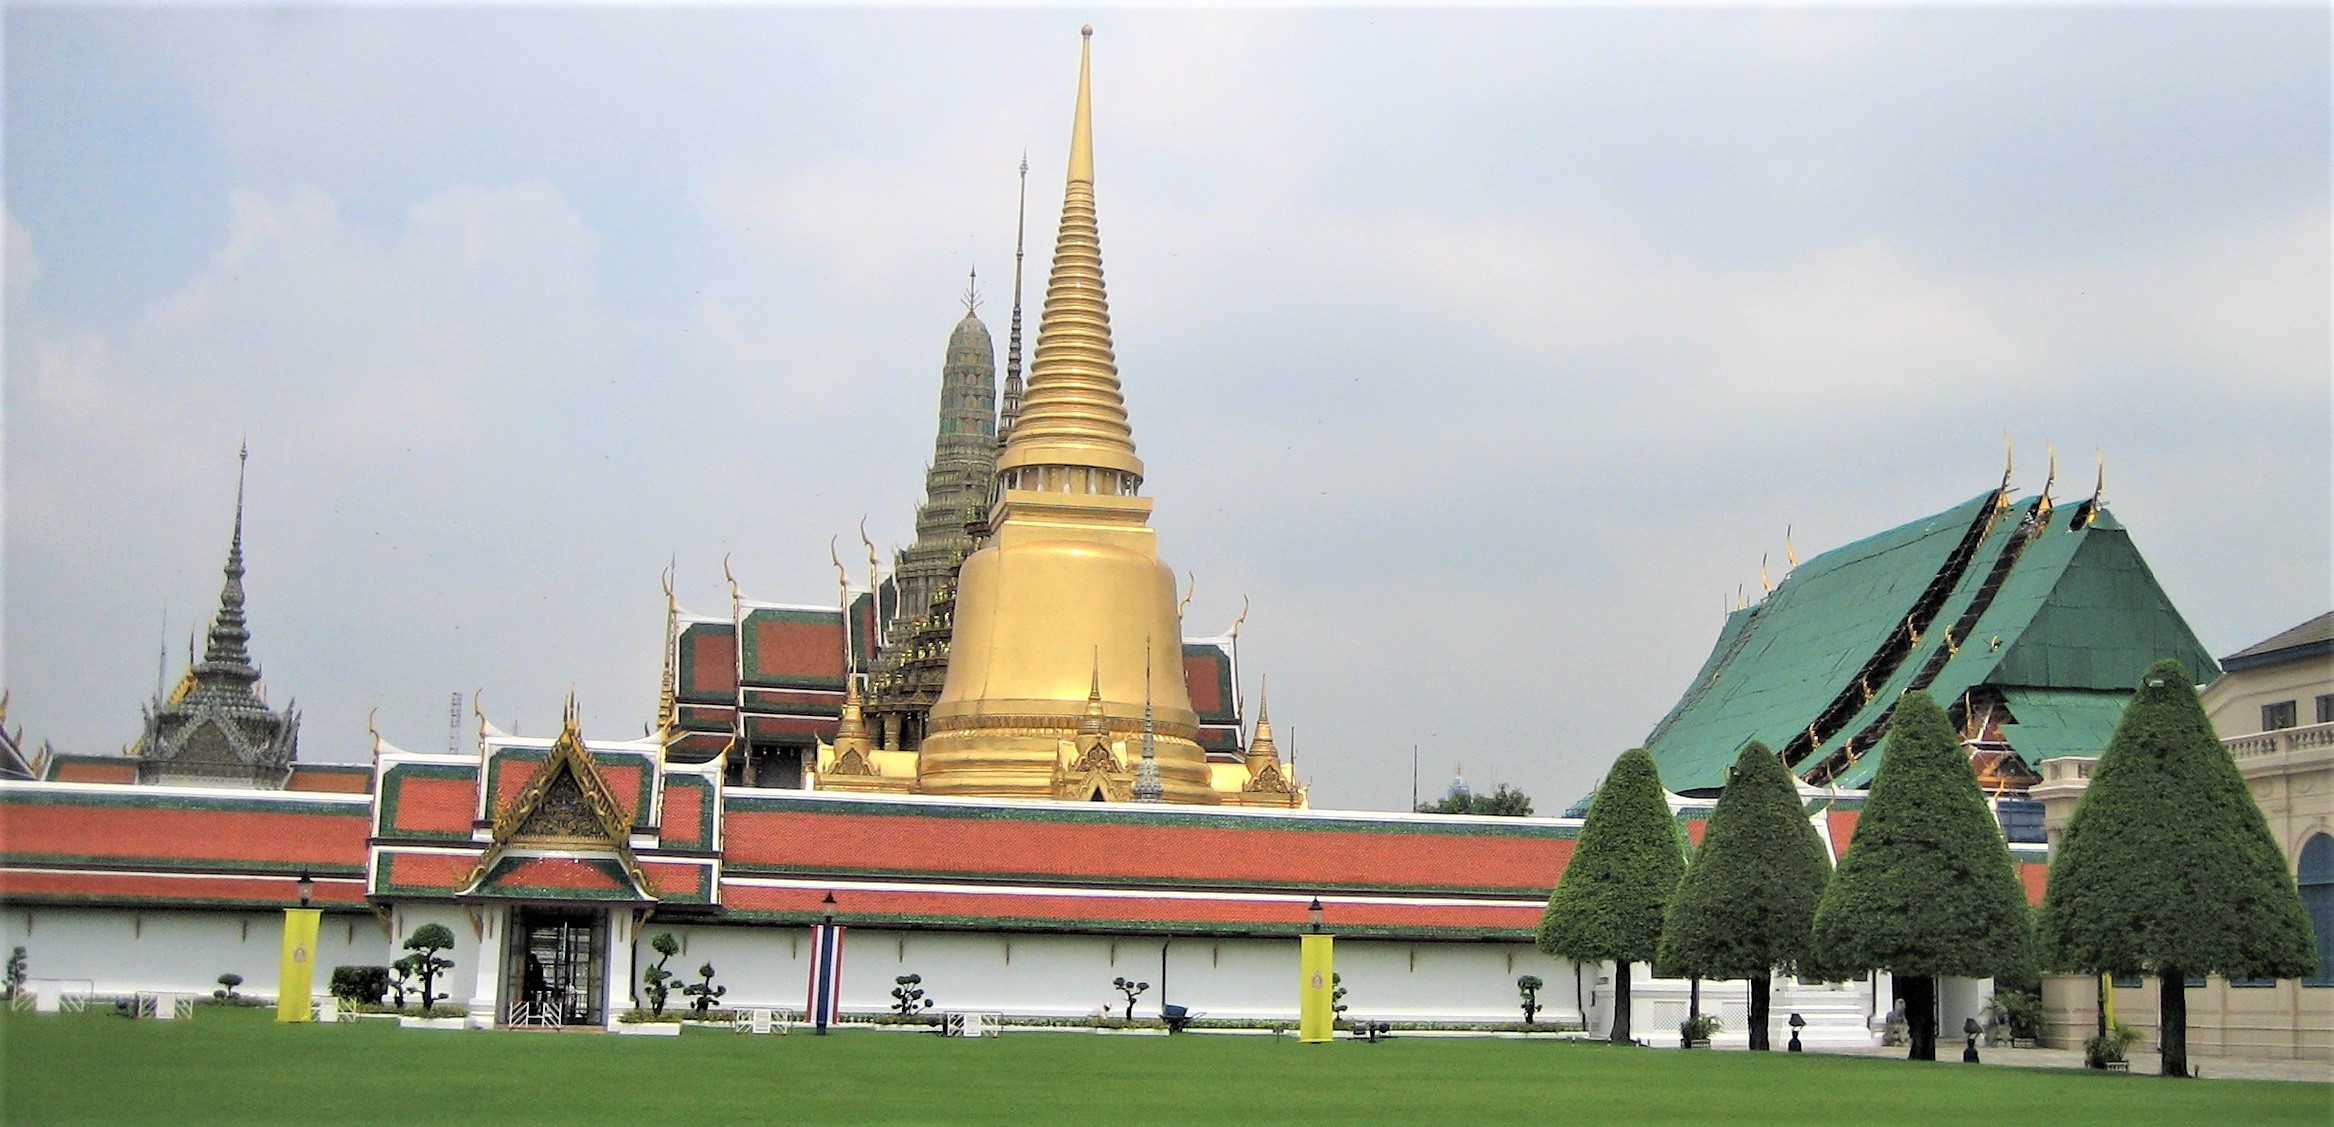 Wat Phra Kaew or Temple of the Emerald Buddha on the Grand Palace grounds on the Chao Phraya River in Bangkok, Thailand